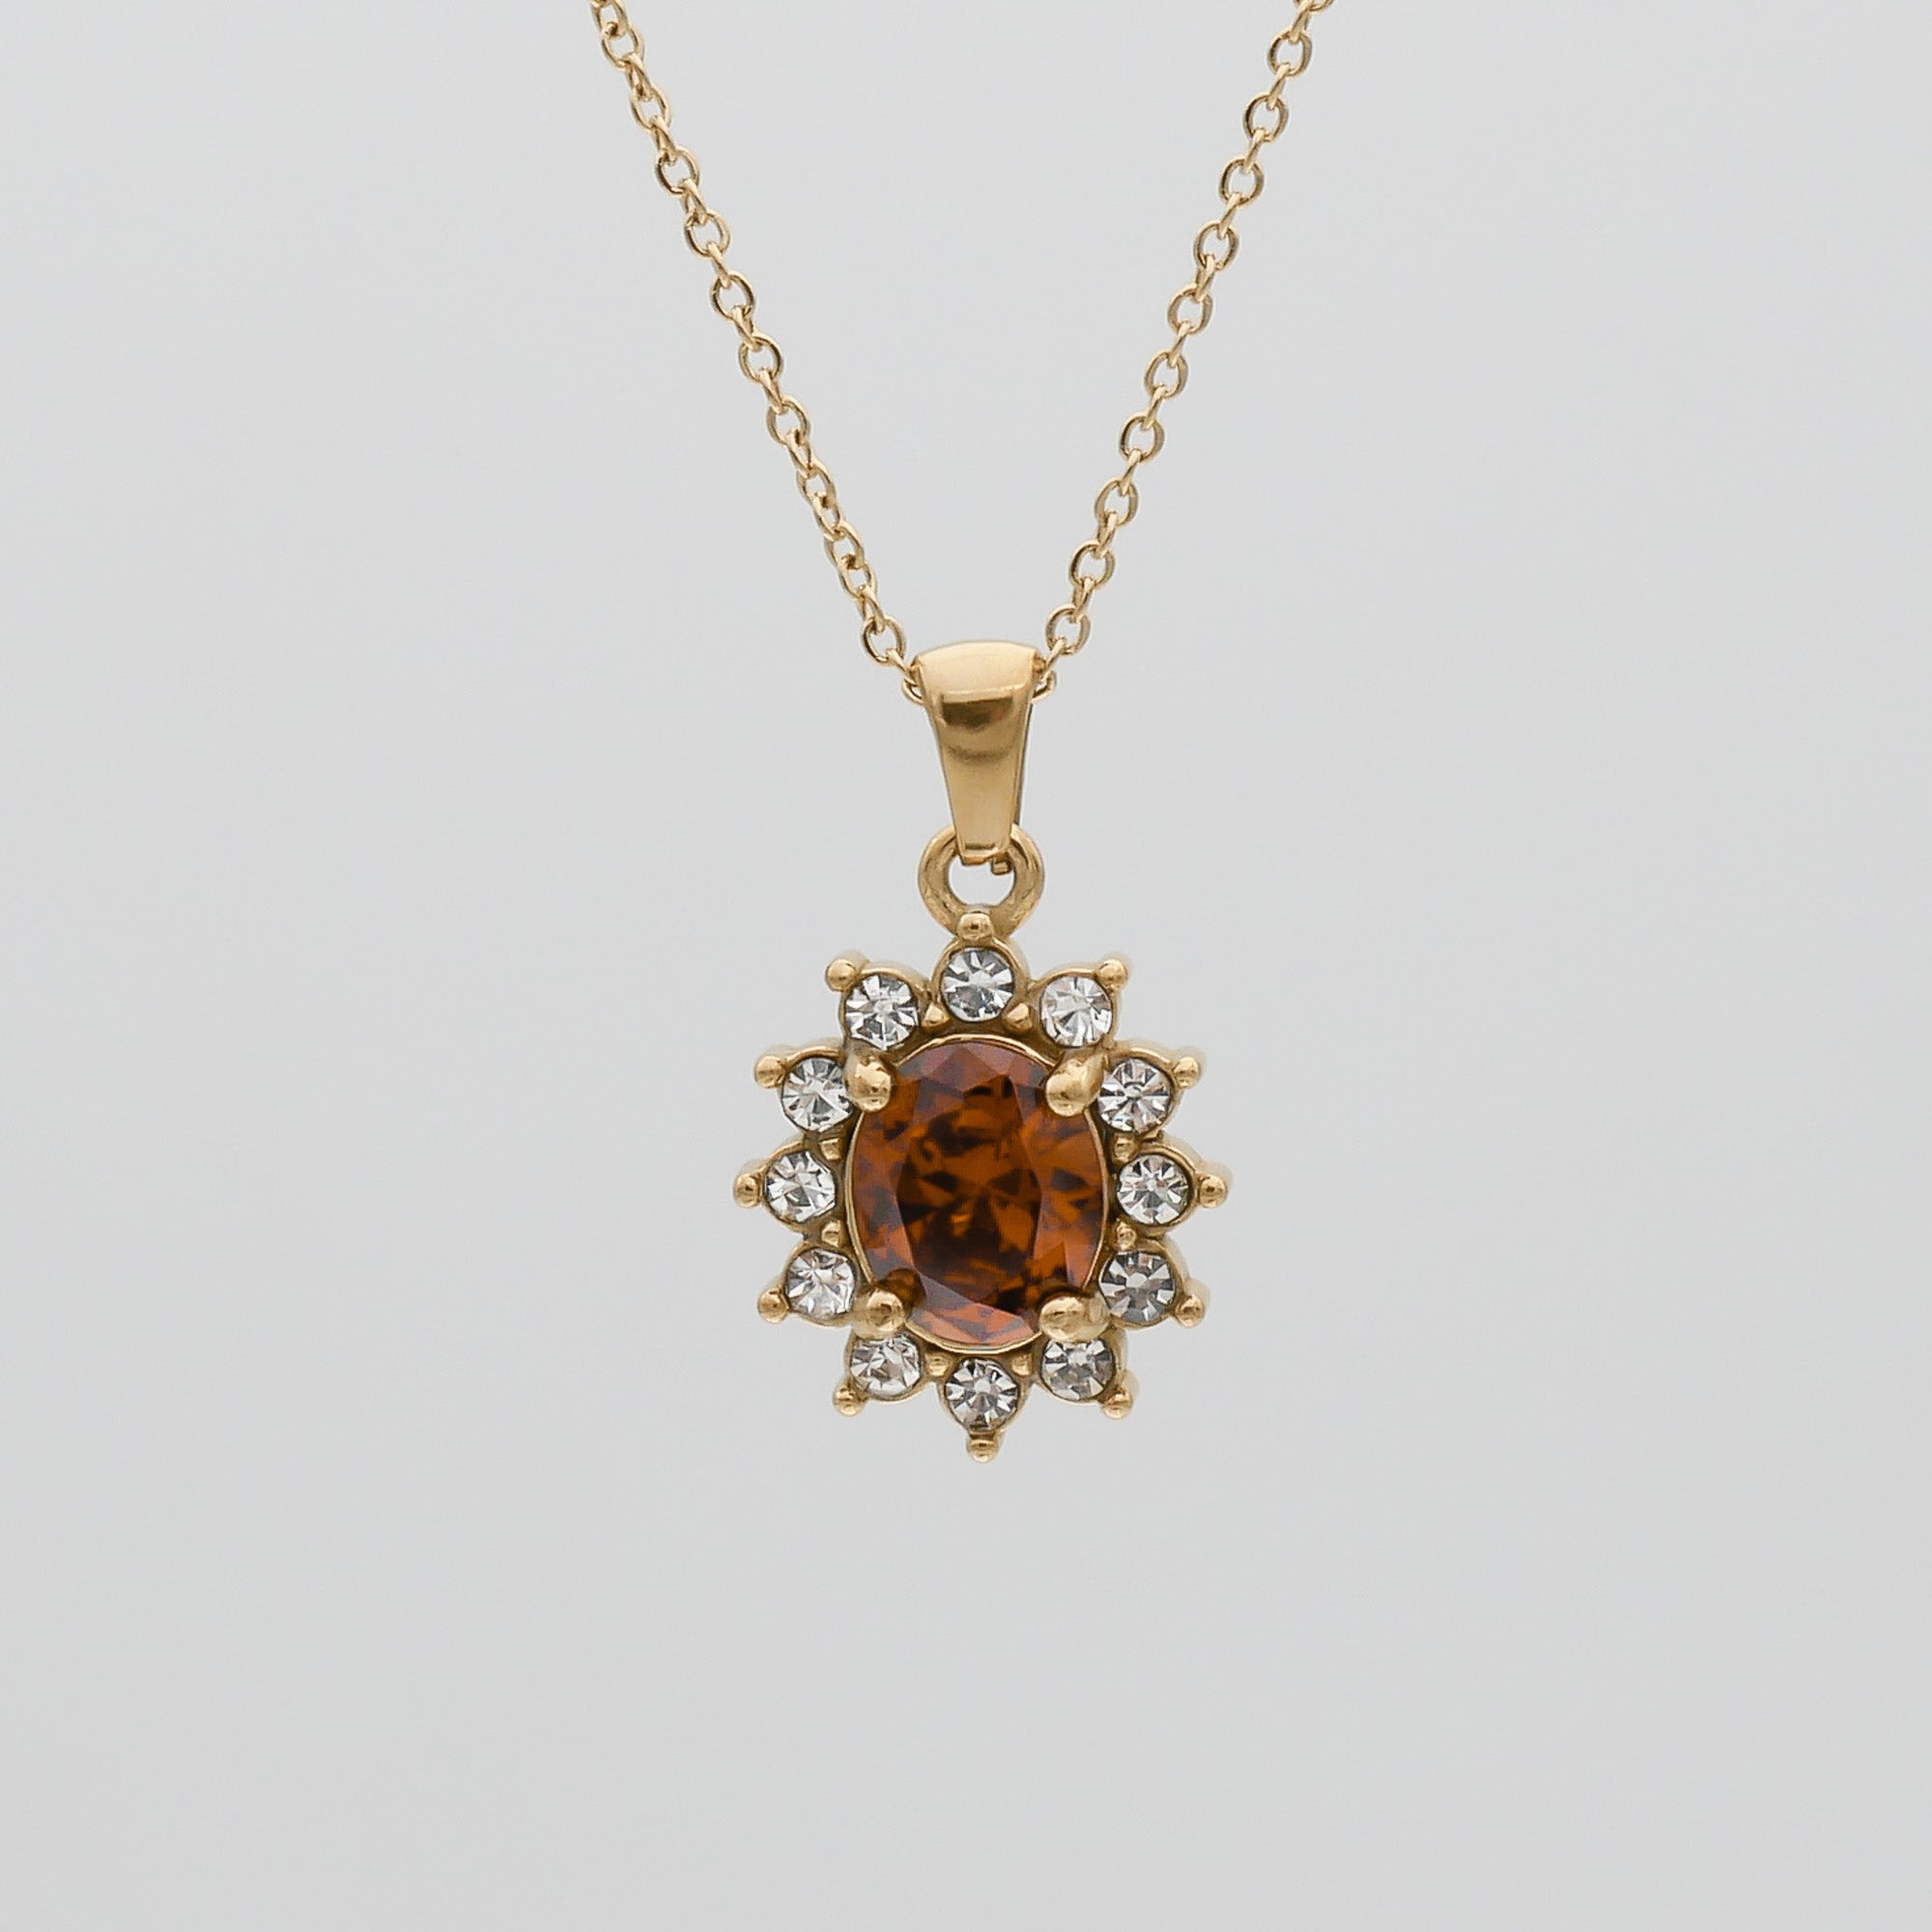 Gold Phoebe Ruby Gemstone Pendant Necklace with encrusted cubic Zirconia stones by PRYA